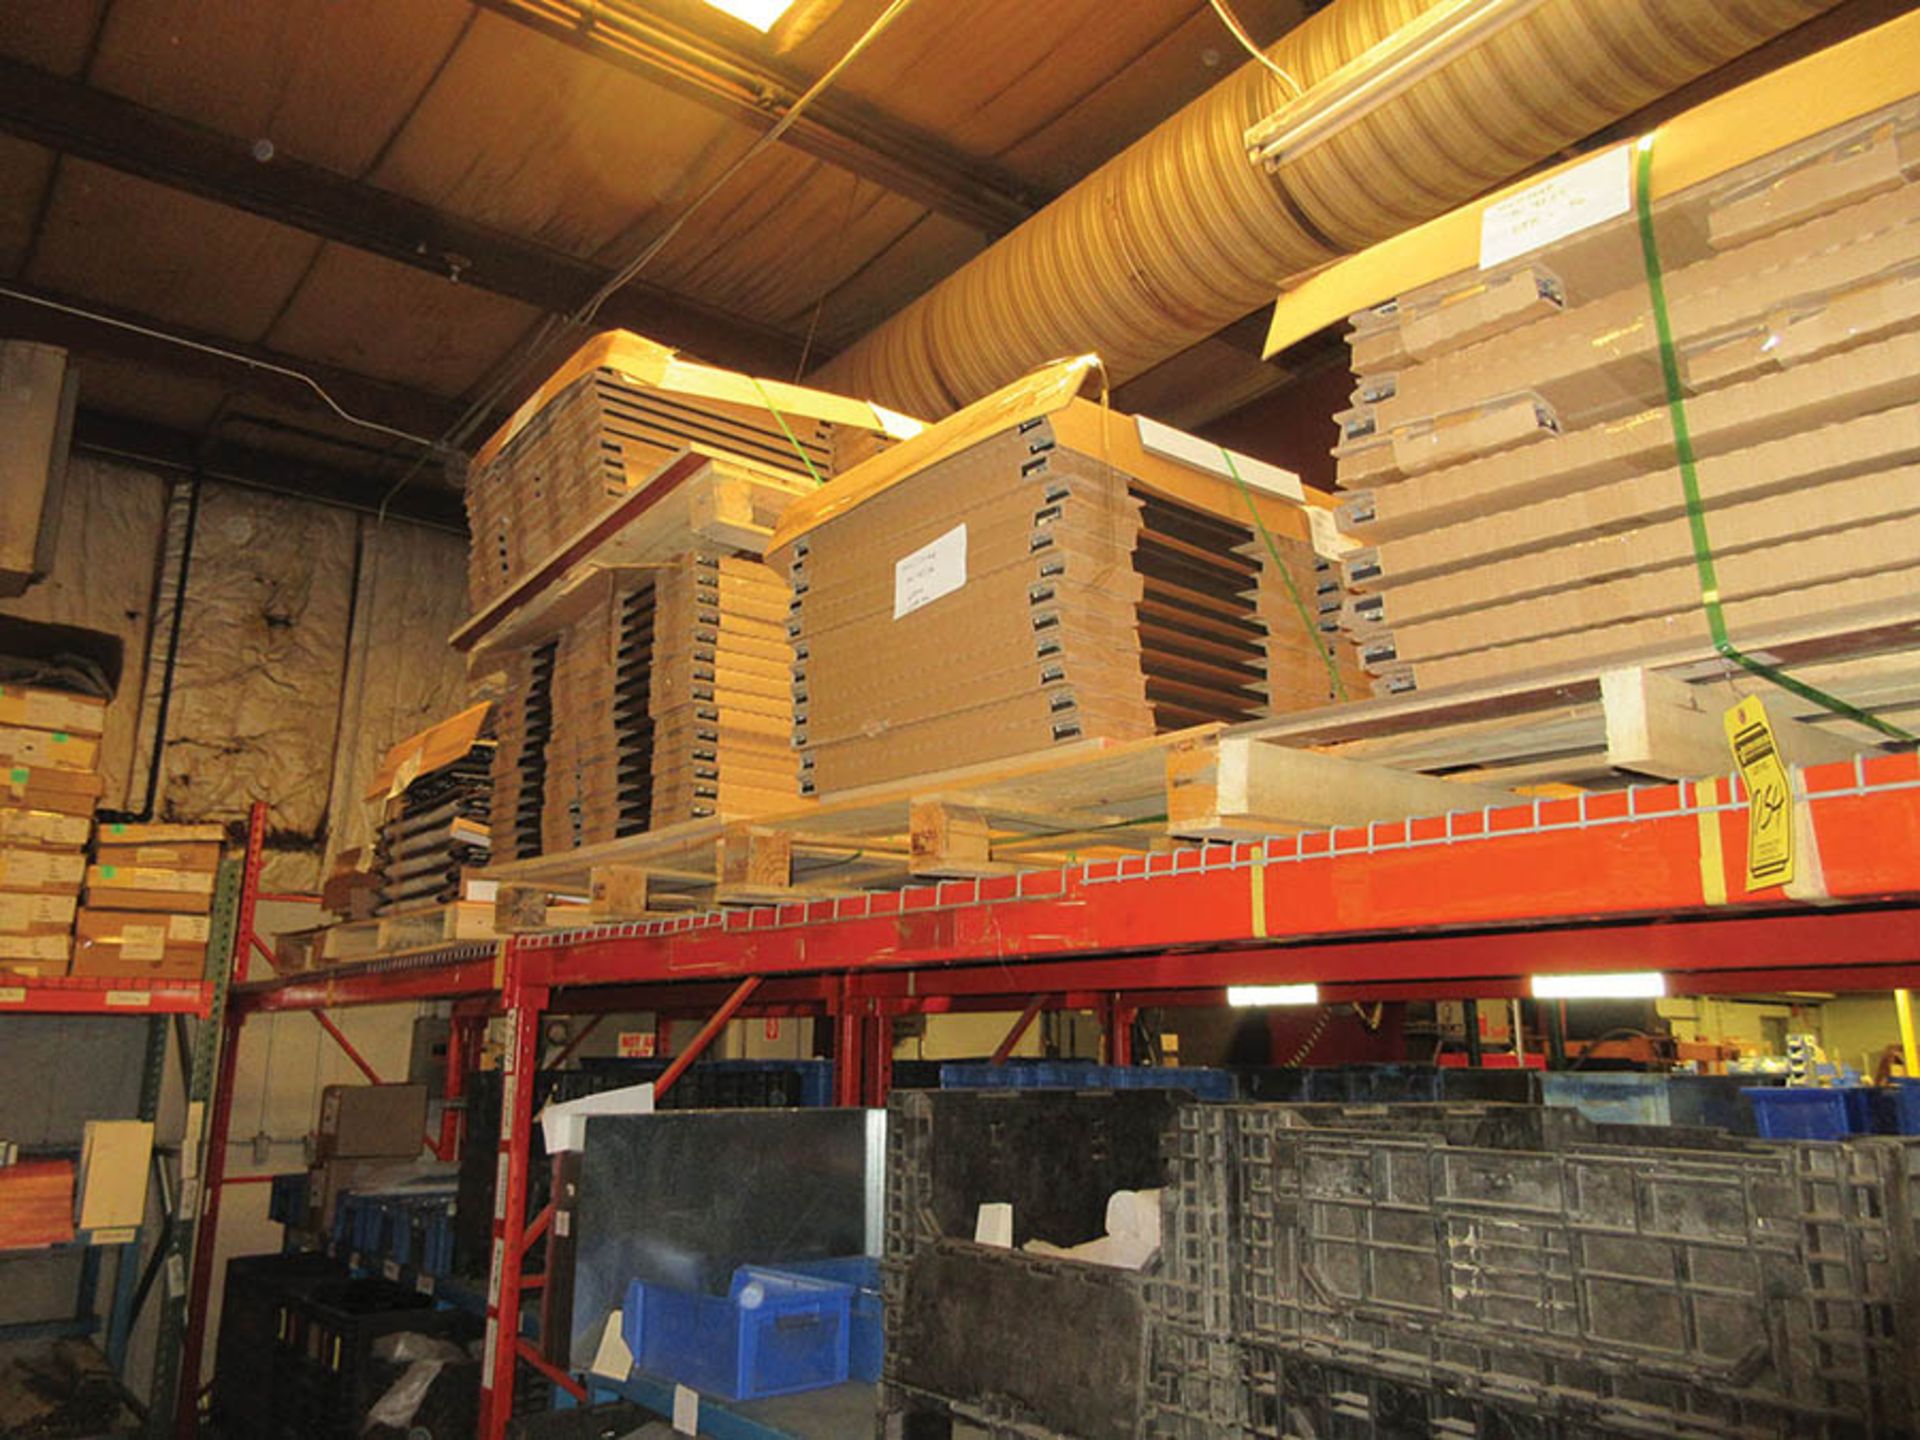 CONTENTS OF (19) SECTIONS OF PALLET RACK: CARDBOARD BOXES, PRODUCTION PARTS, AKRO BINS, FRAME - Image 7 of 11